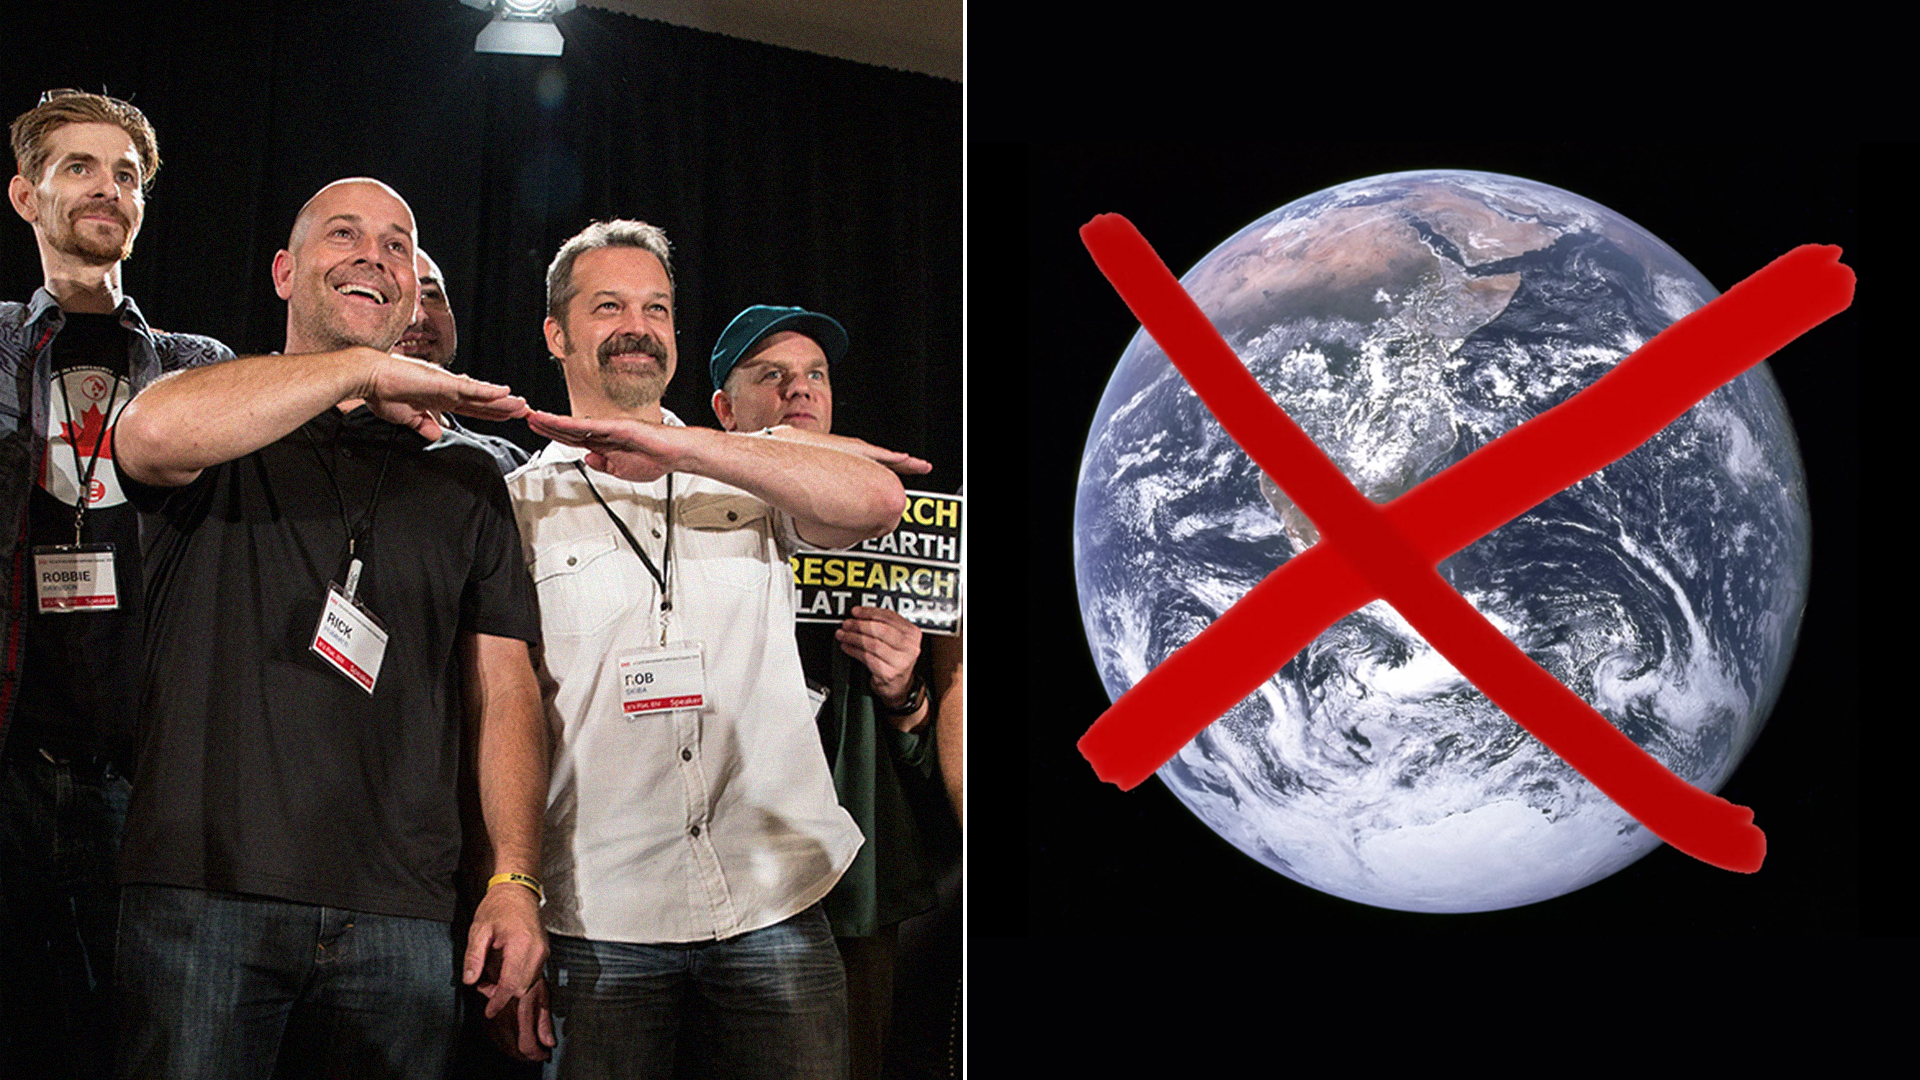 flat earth society conference